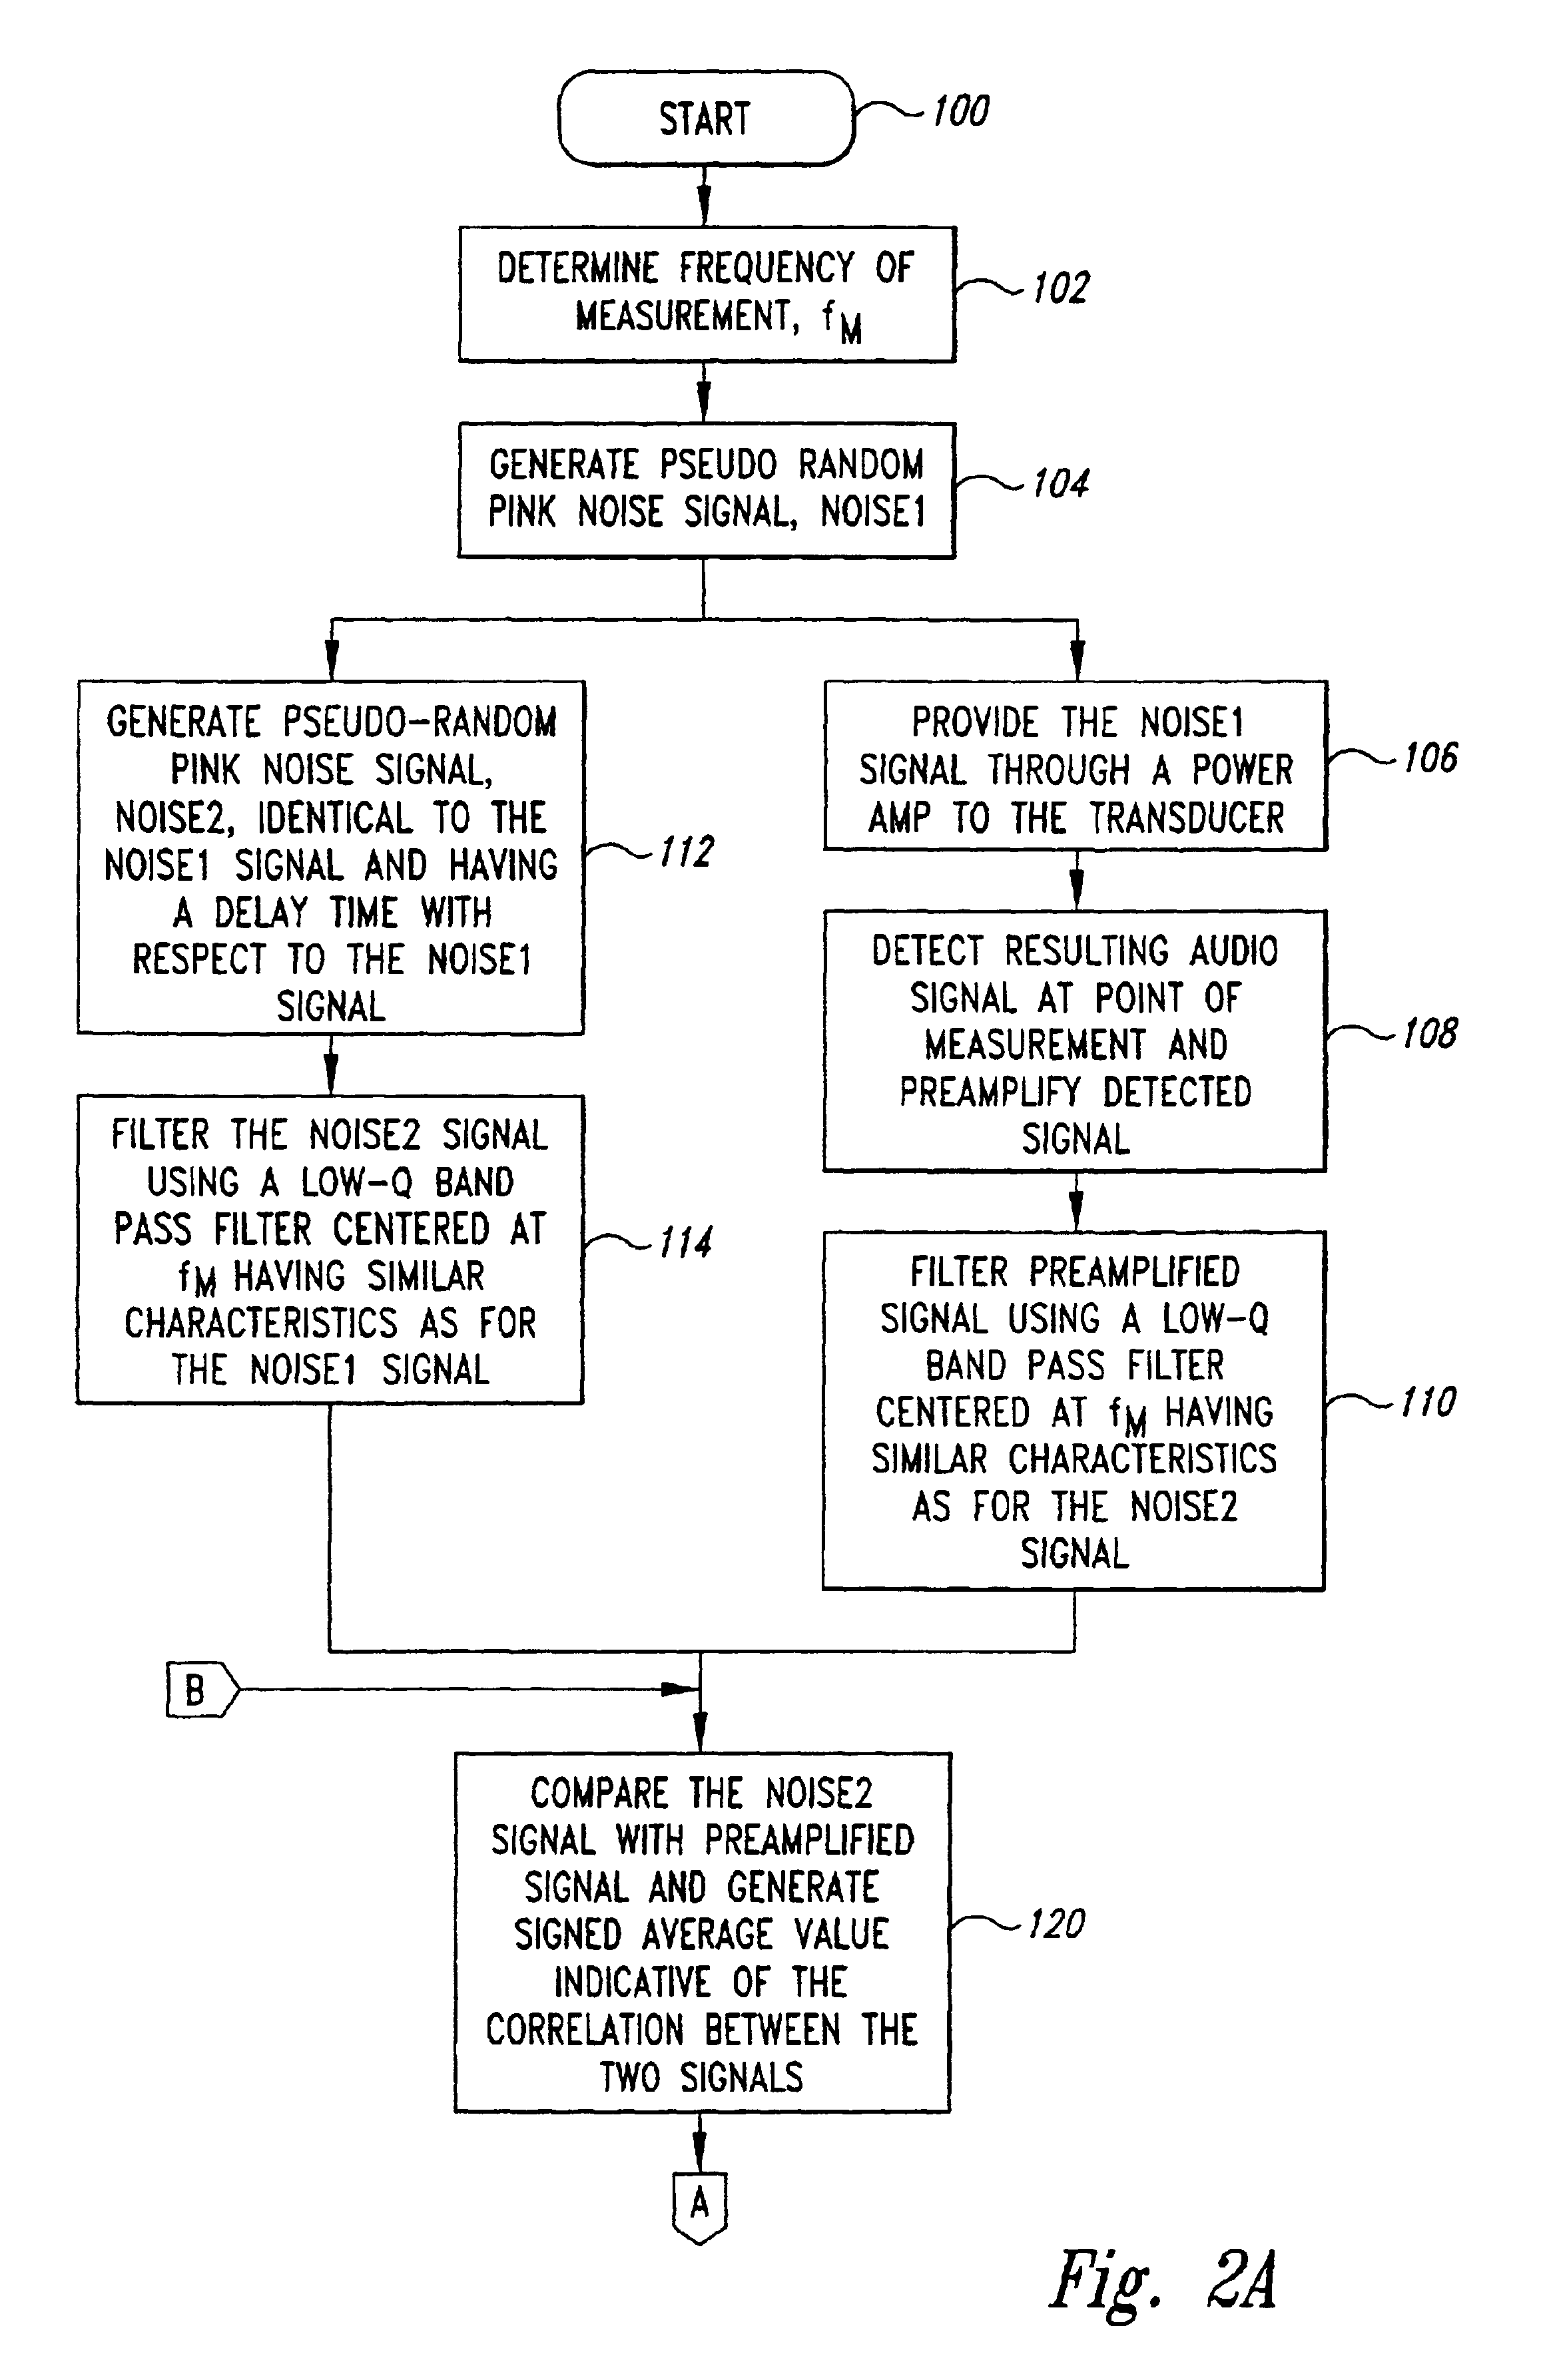 Apparatus and method for analyzing an electro-acoustic system